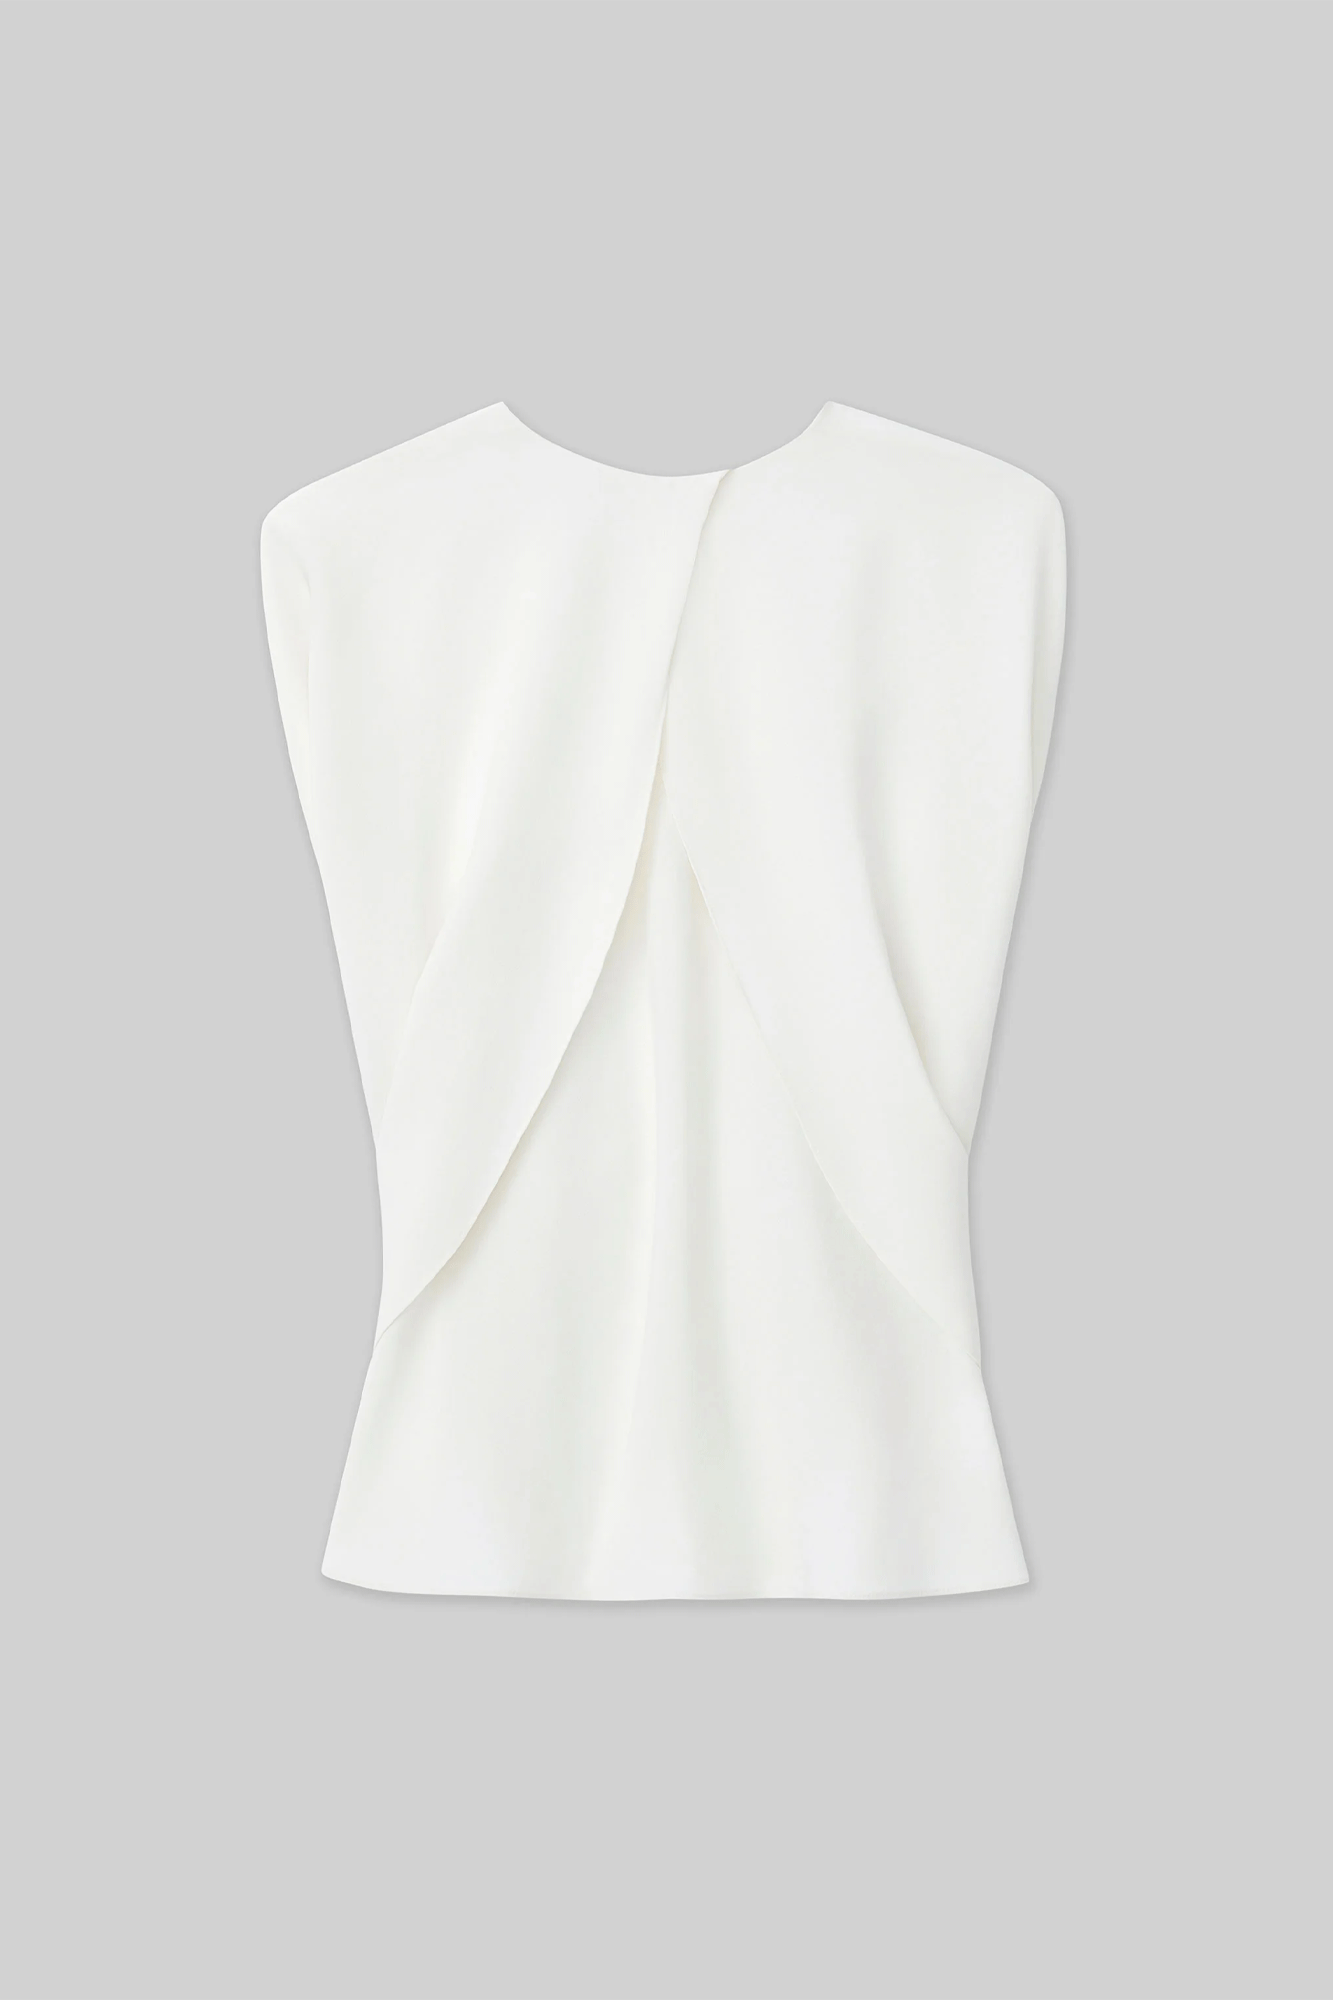 Achieve effortless elegance in this Shawl Sleeve Blouse from Lafayette 148. Crafted from Finesse Crepe, this bias-cut blouse can be worn as a draped shawl, off-the-shoulder, cape, or cowl for a unique, timeless look. The trimmed jewel neckline and deep keyhole back add a touch of sophistication.